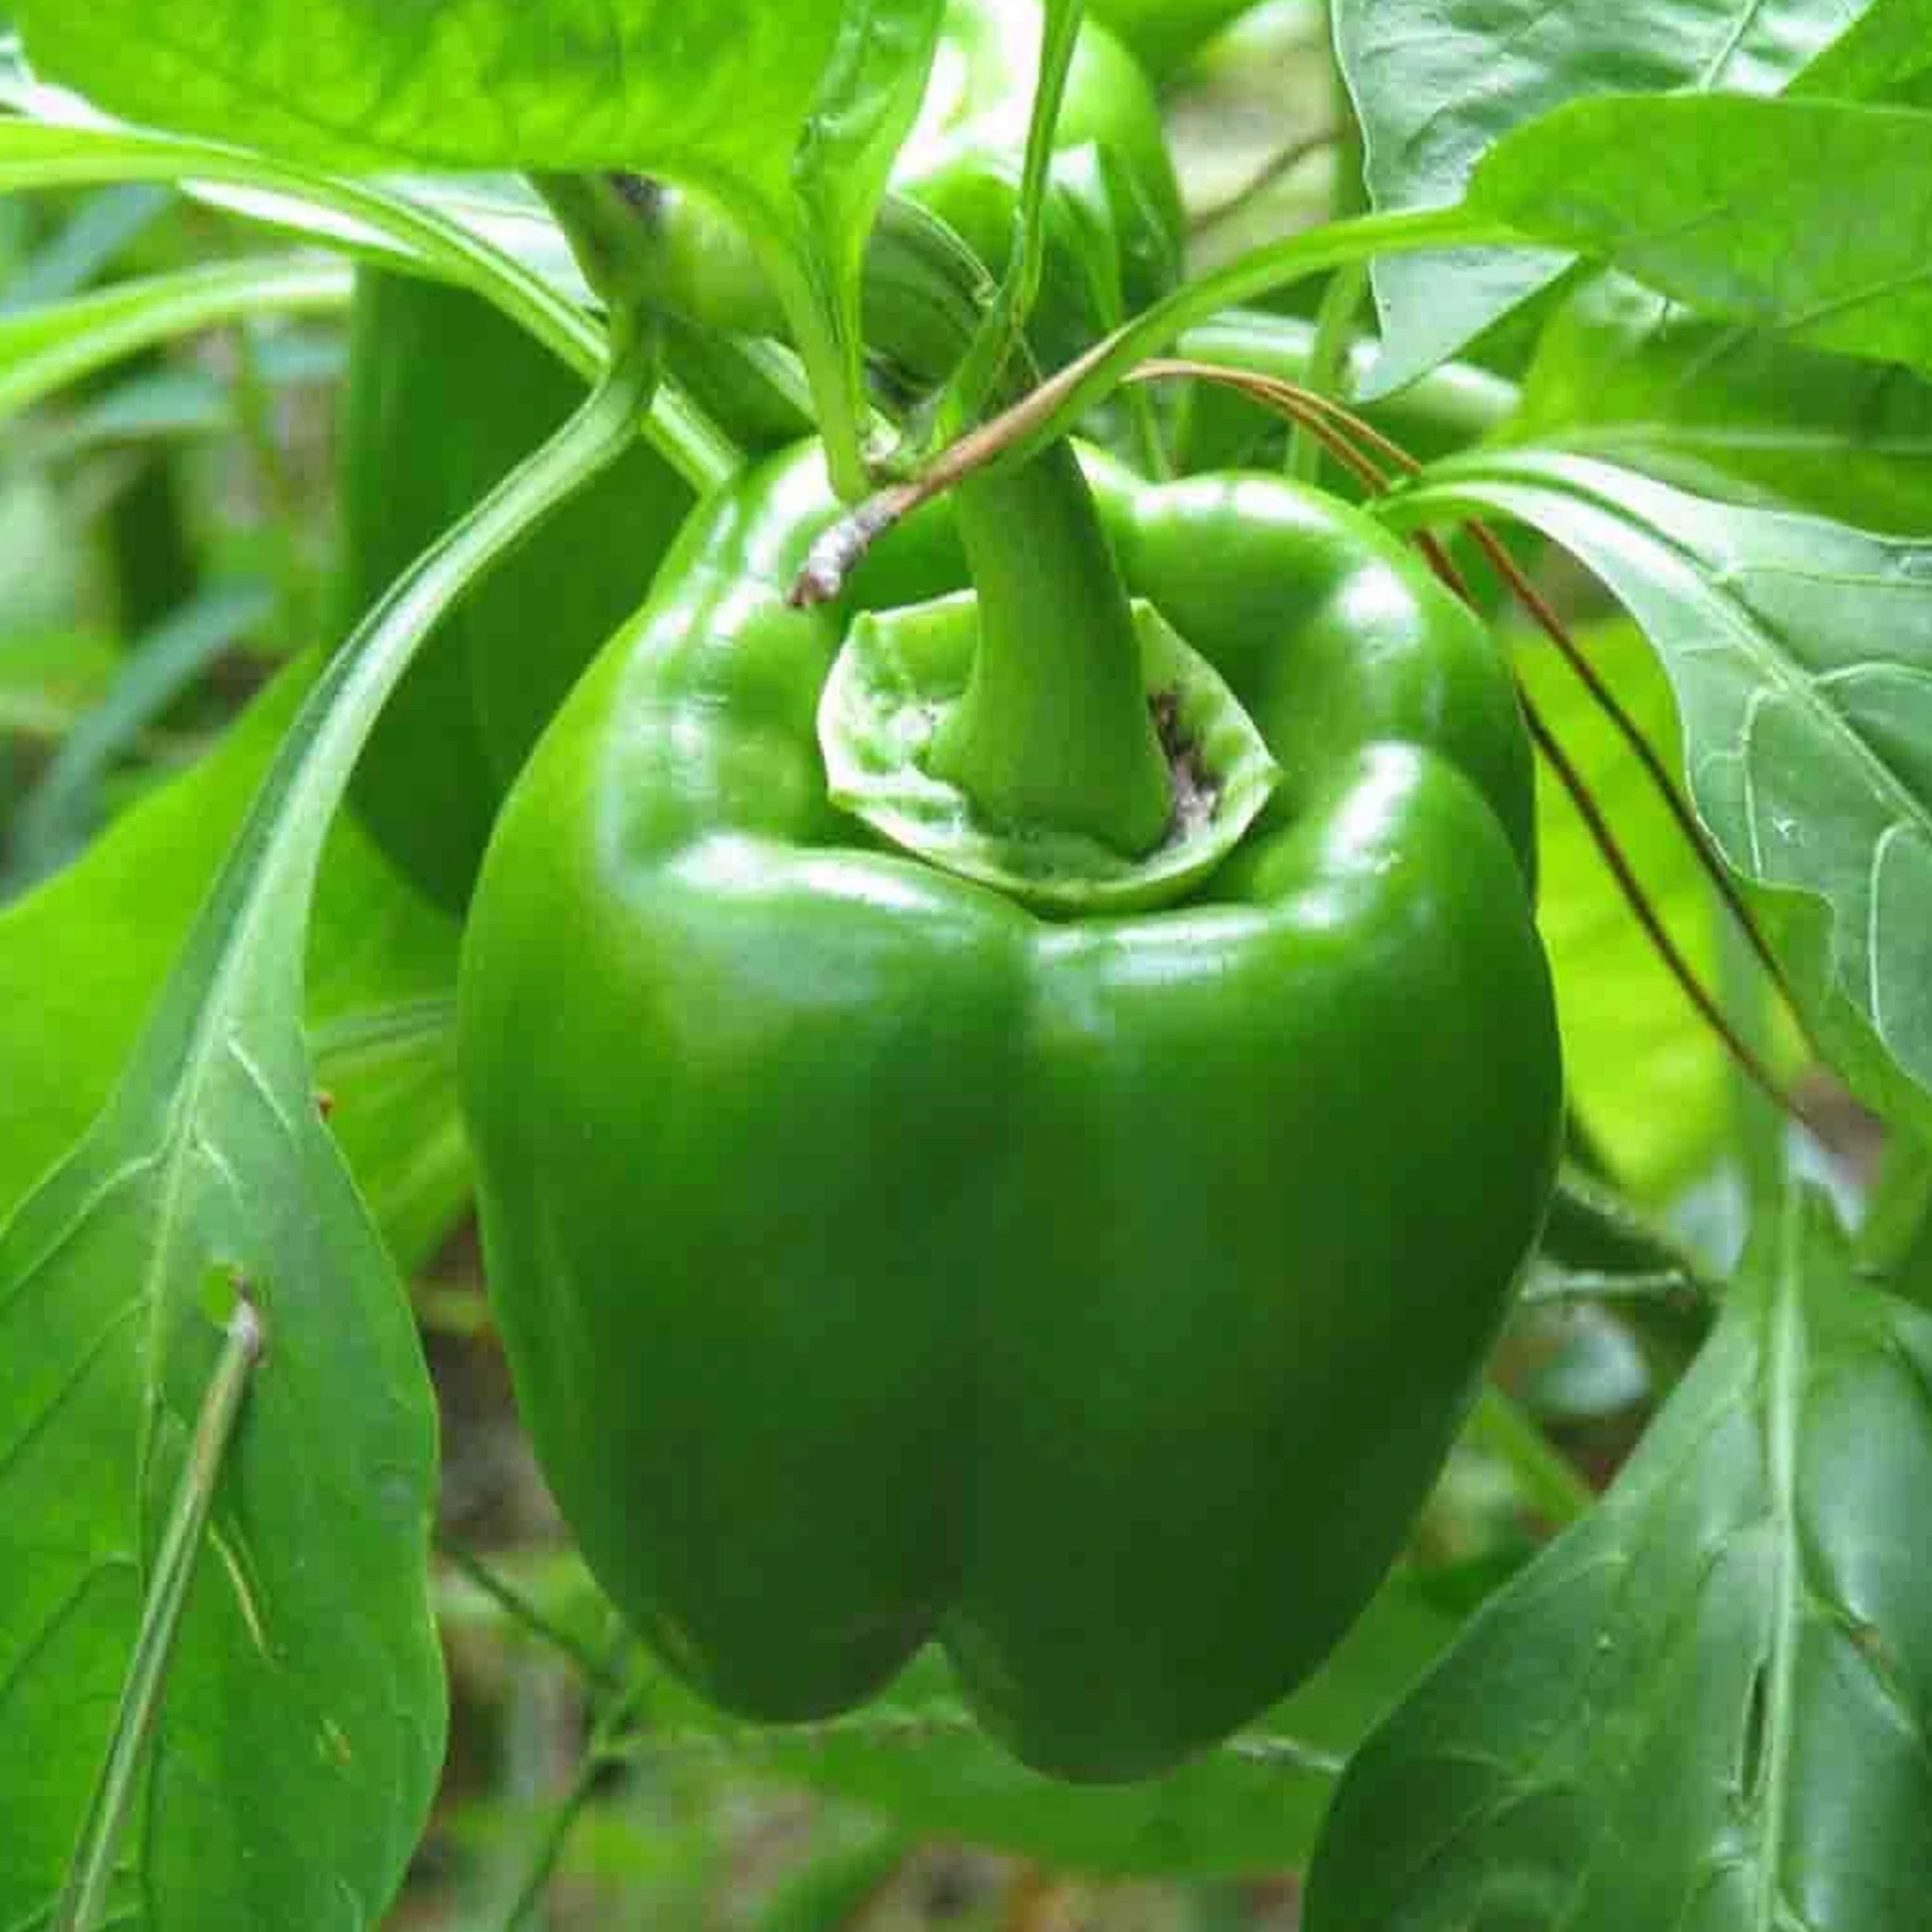 Ferry-Morse Plantlings 1-3 inch Pepper Bell California Wonder Live Plants (3 Count)